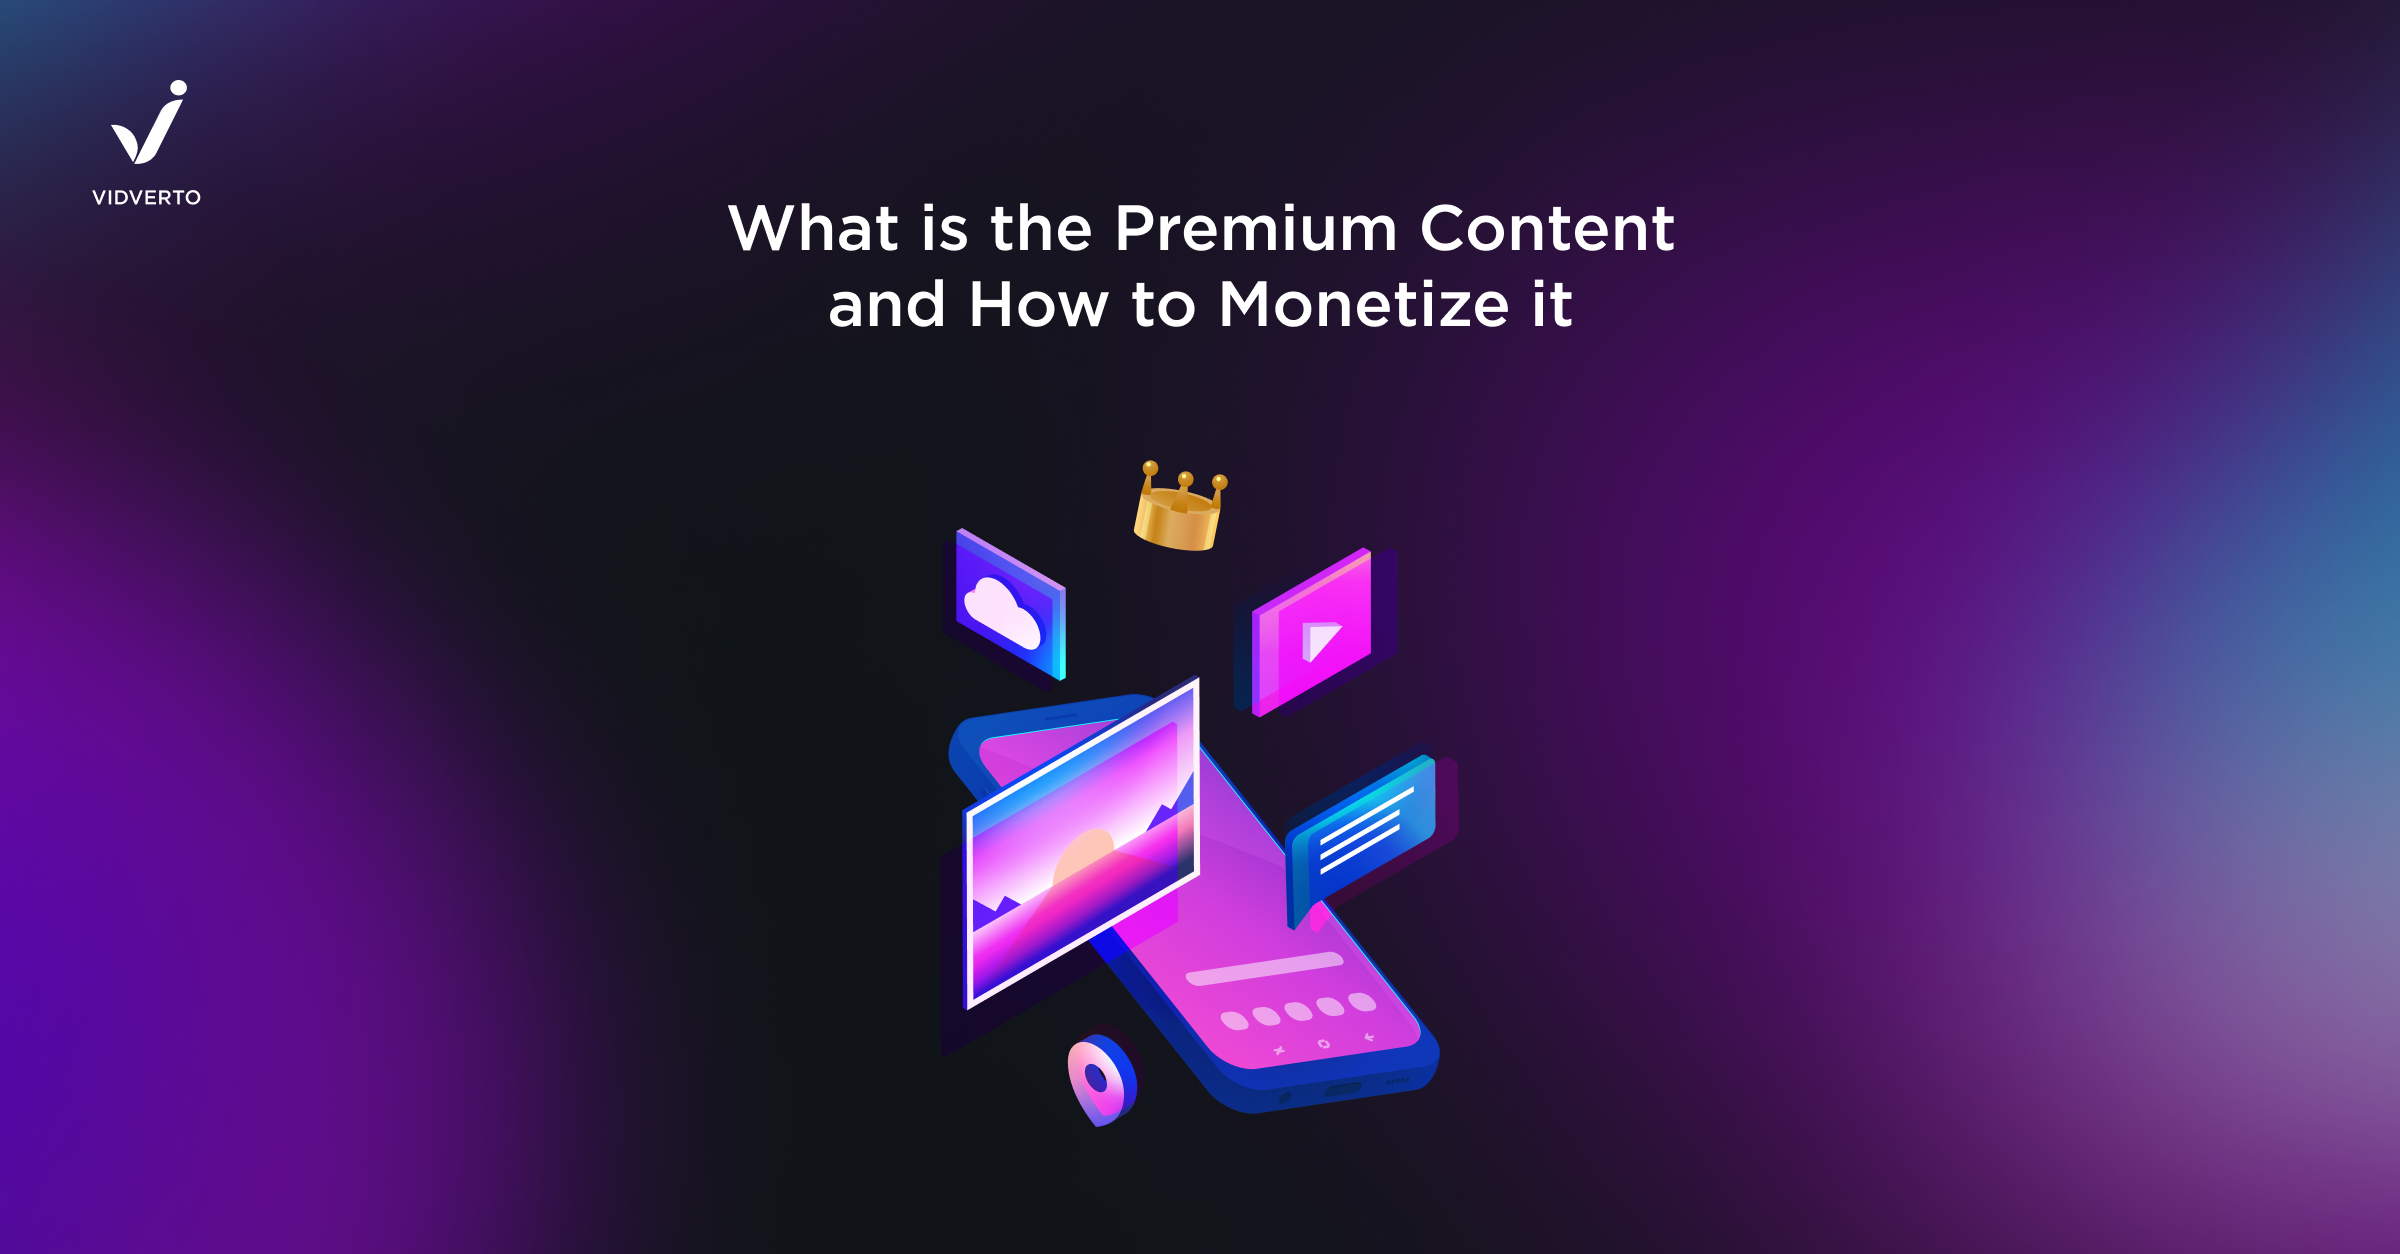 What is the Premium Content and How to Monetize it